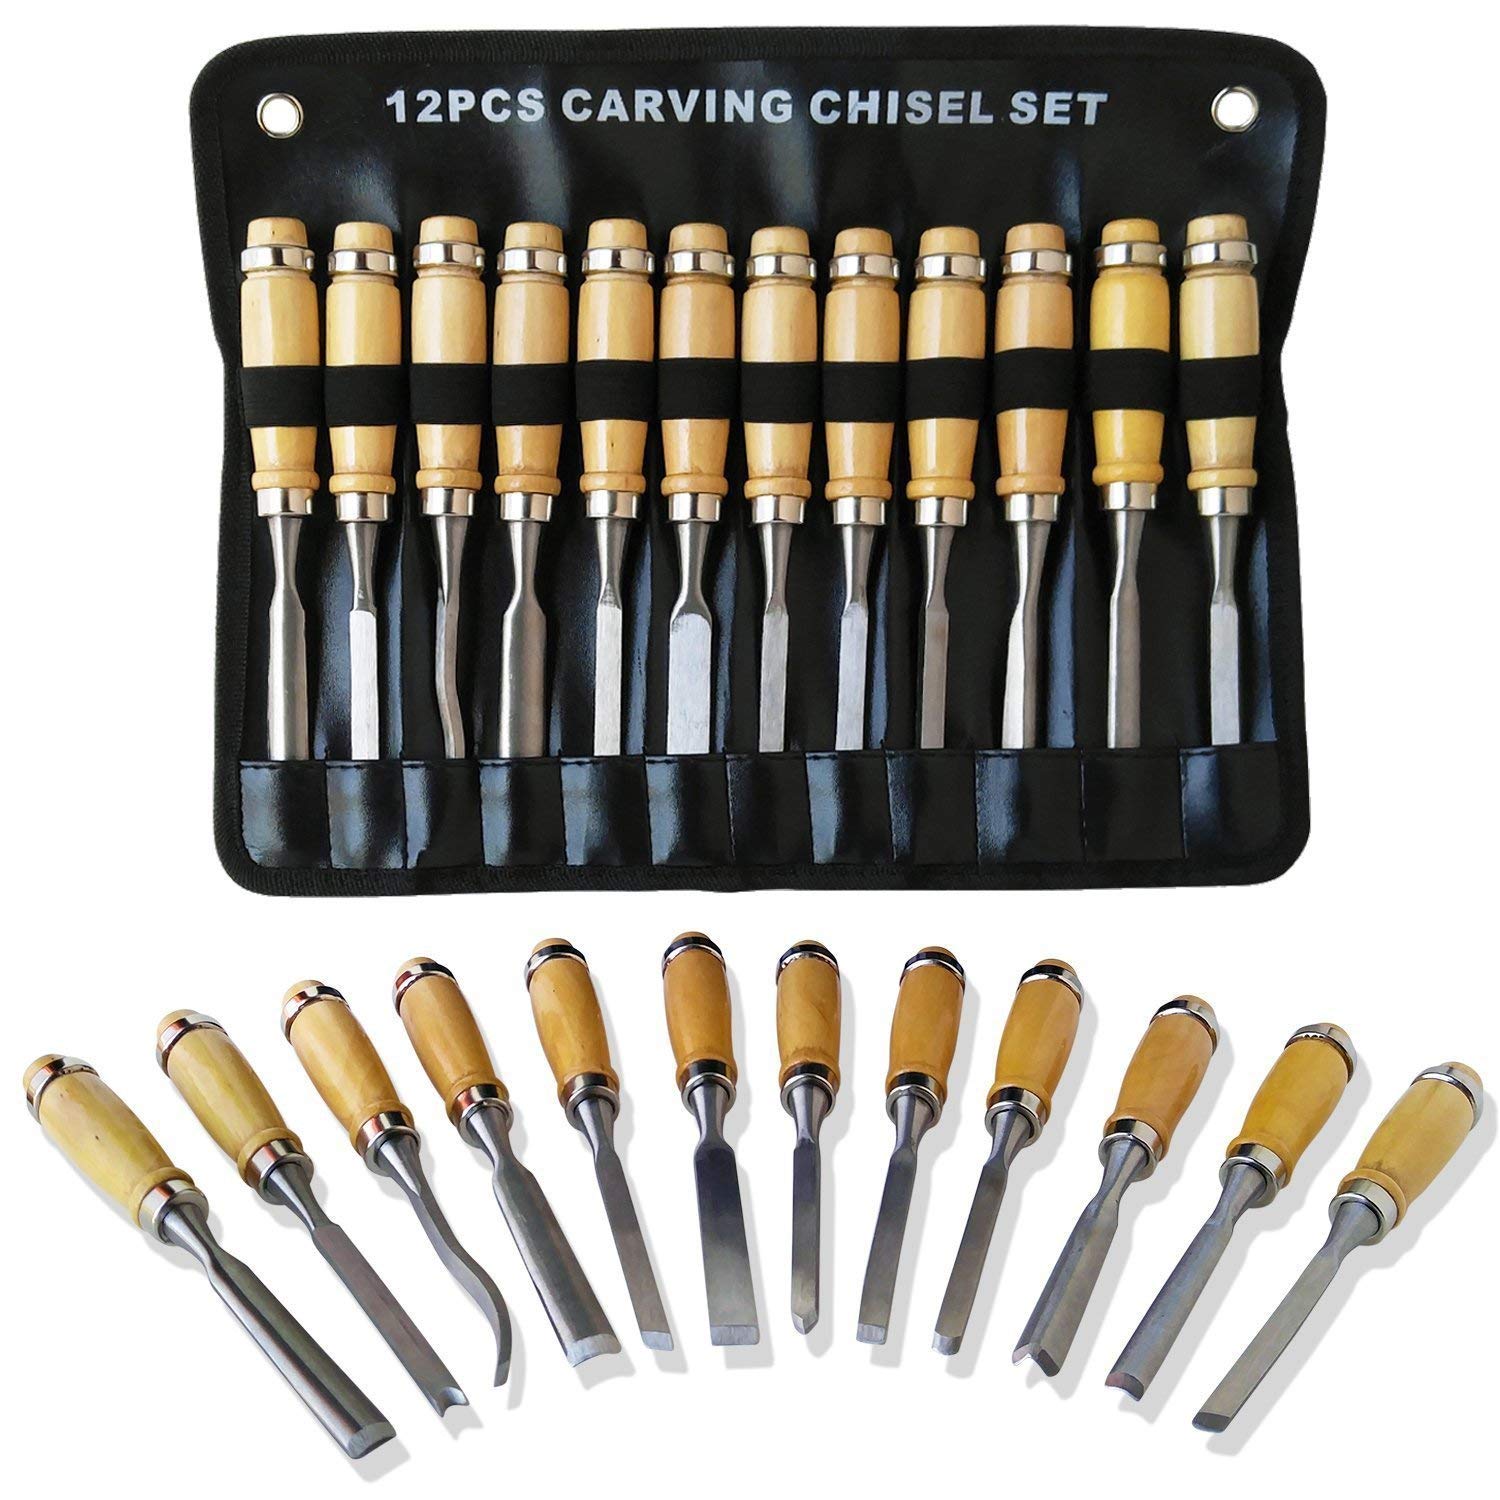 Wood Carving Chisel Set - 12 Piece Sharp Woodworking Tools with Carrying Case